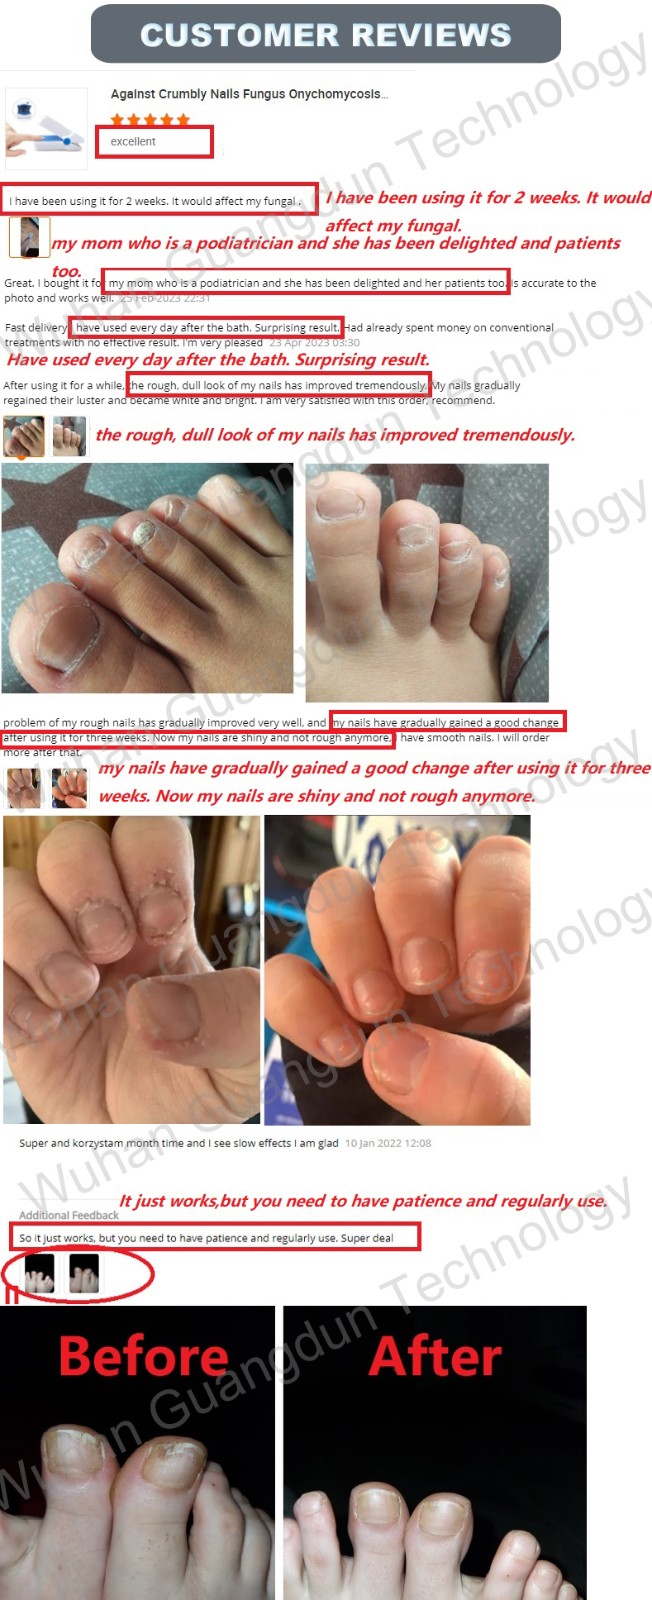 Laser treatment for fungal nail infection